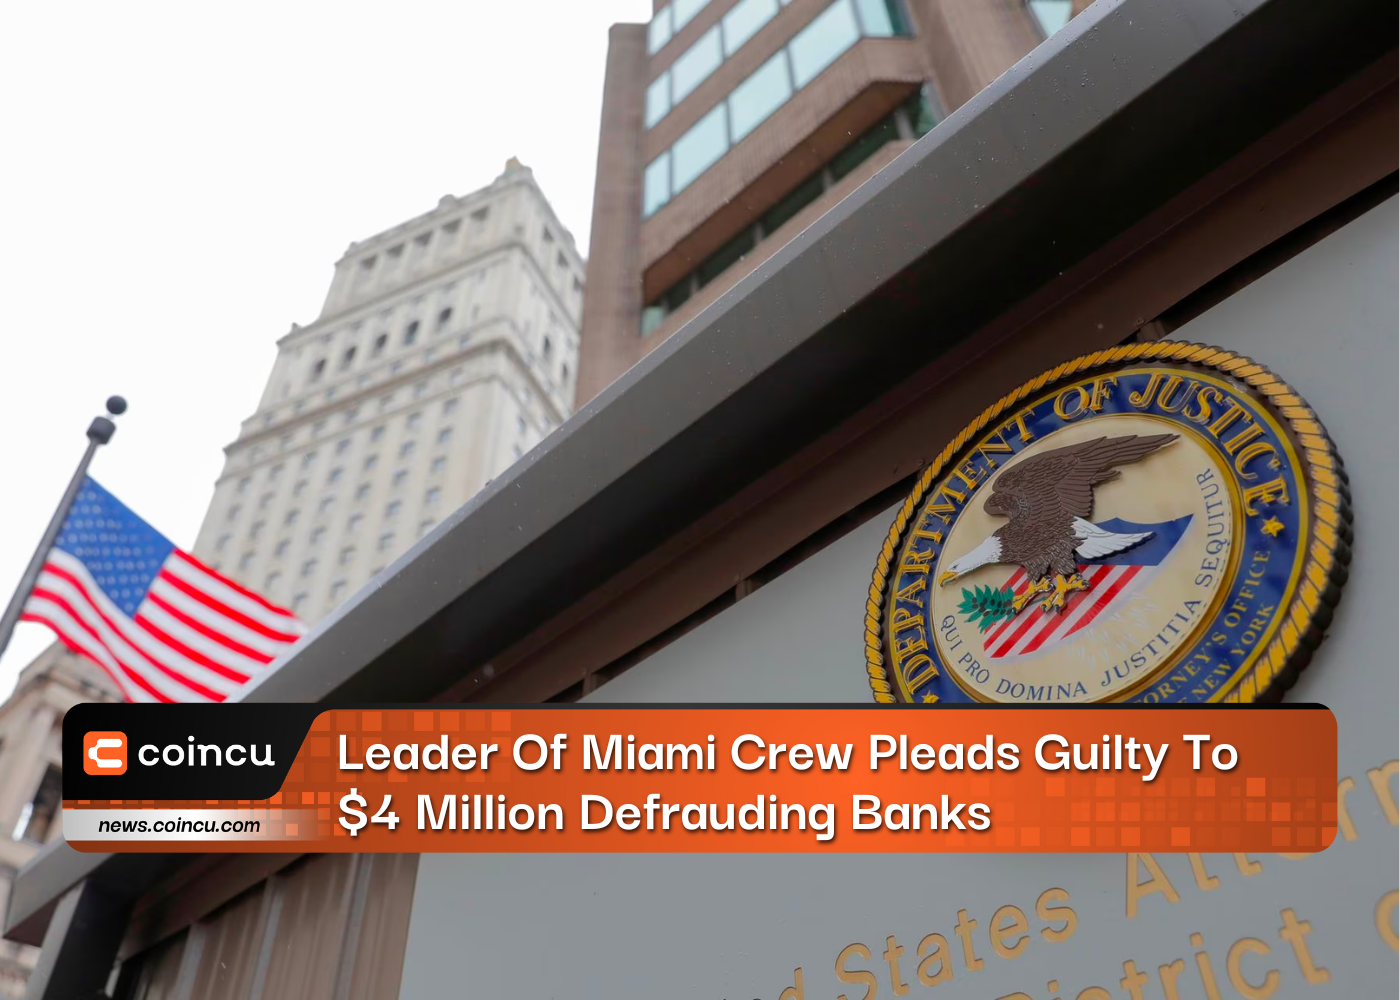 Leader Of Miami Crew Pleads Guilty To $4 Million Defrauding Banks